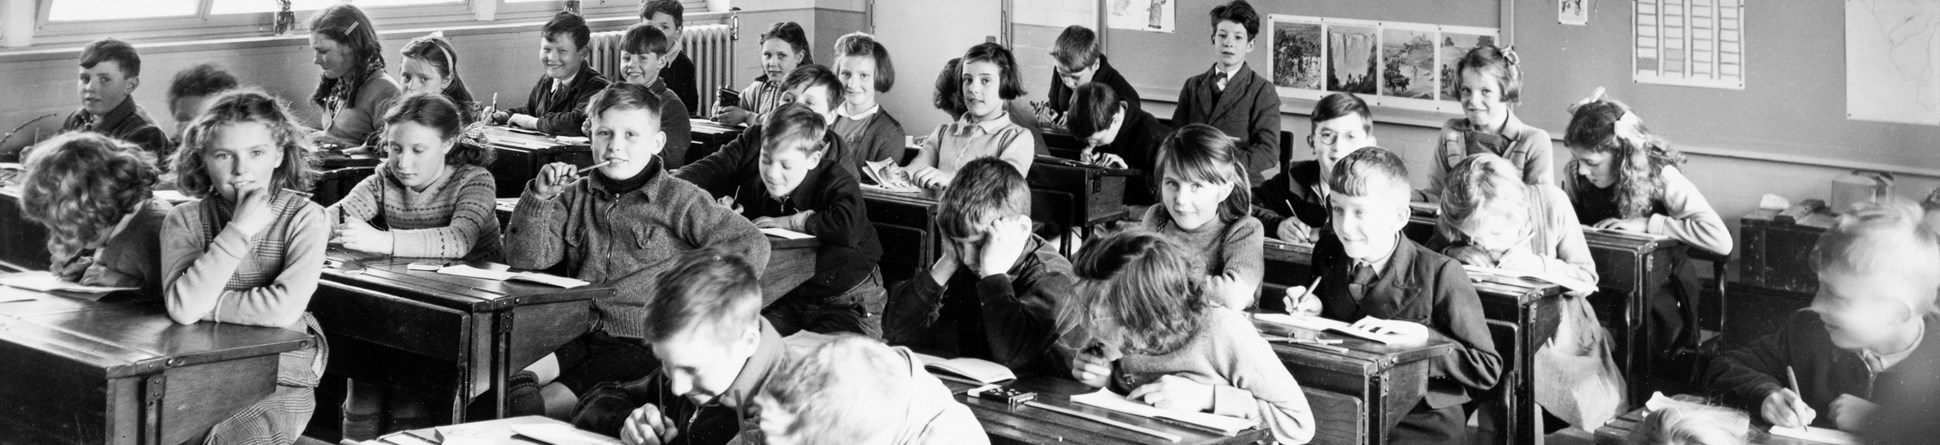 Black and white photo of children studying at their desks in a classroom at Cleator Moor School